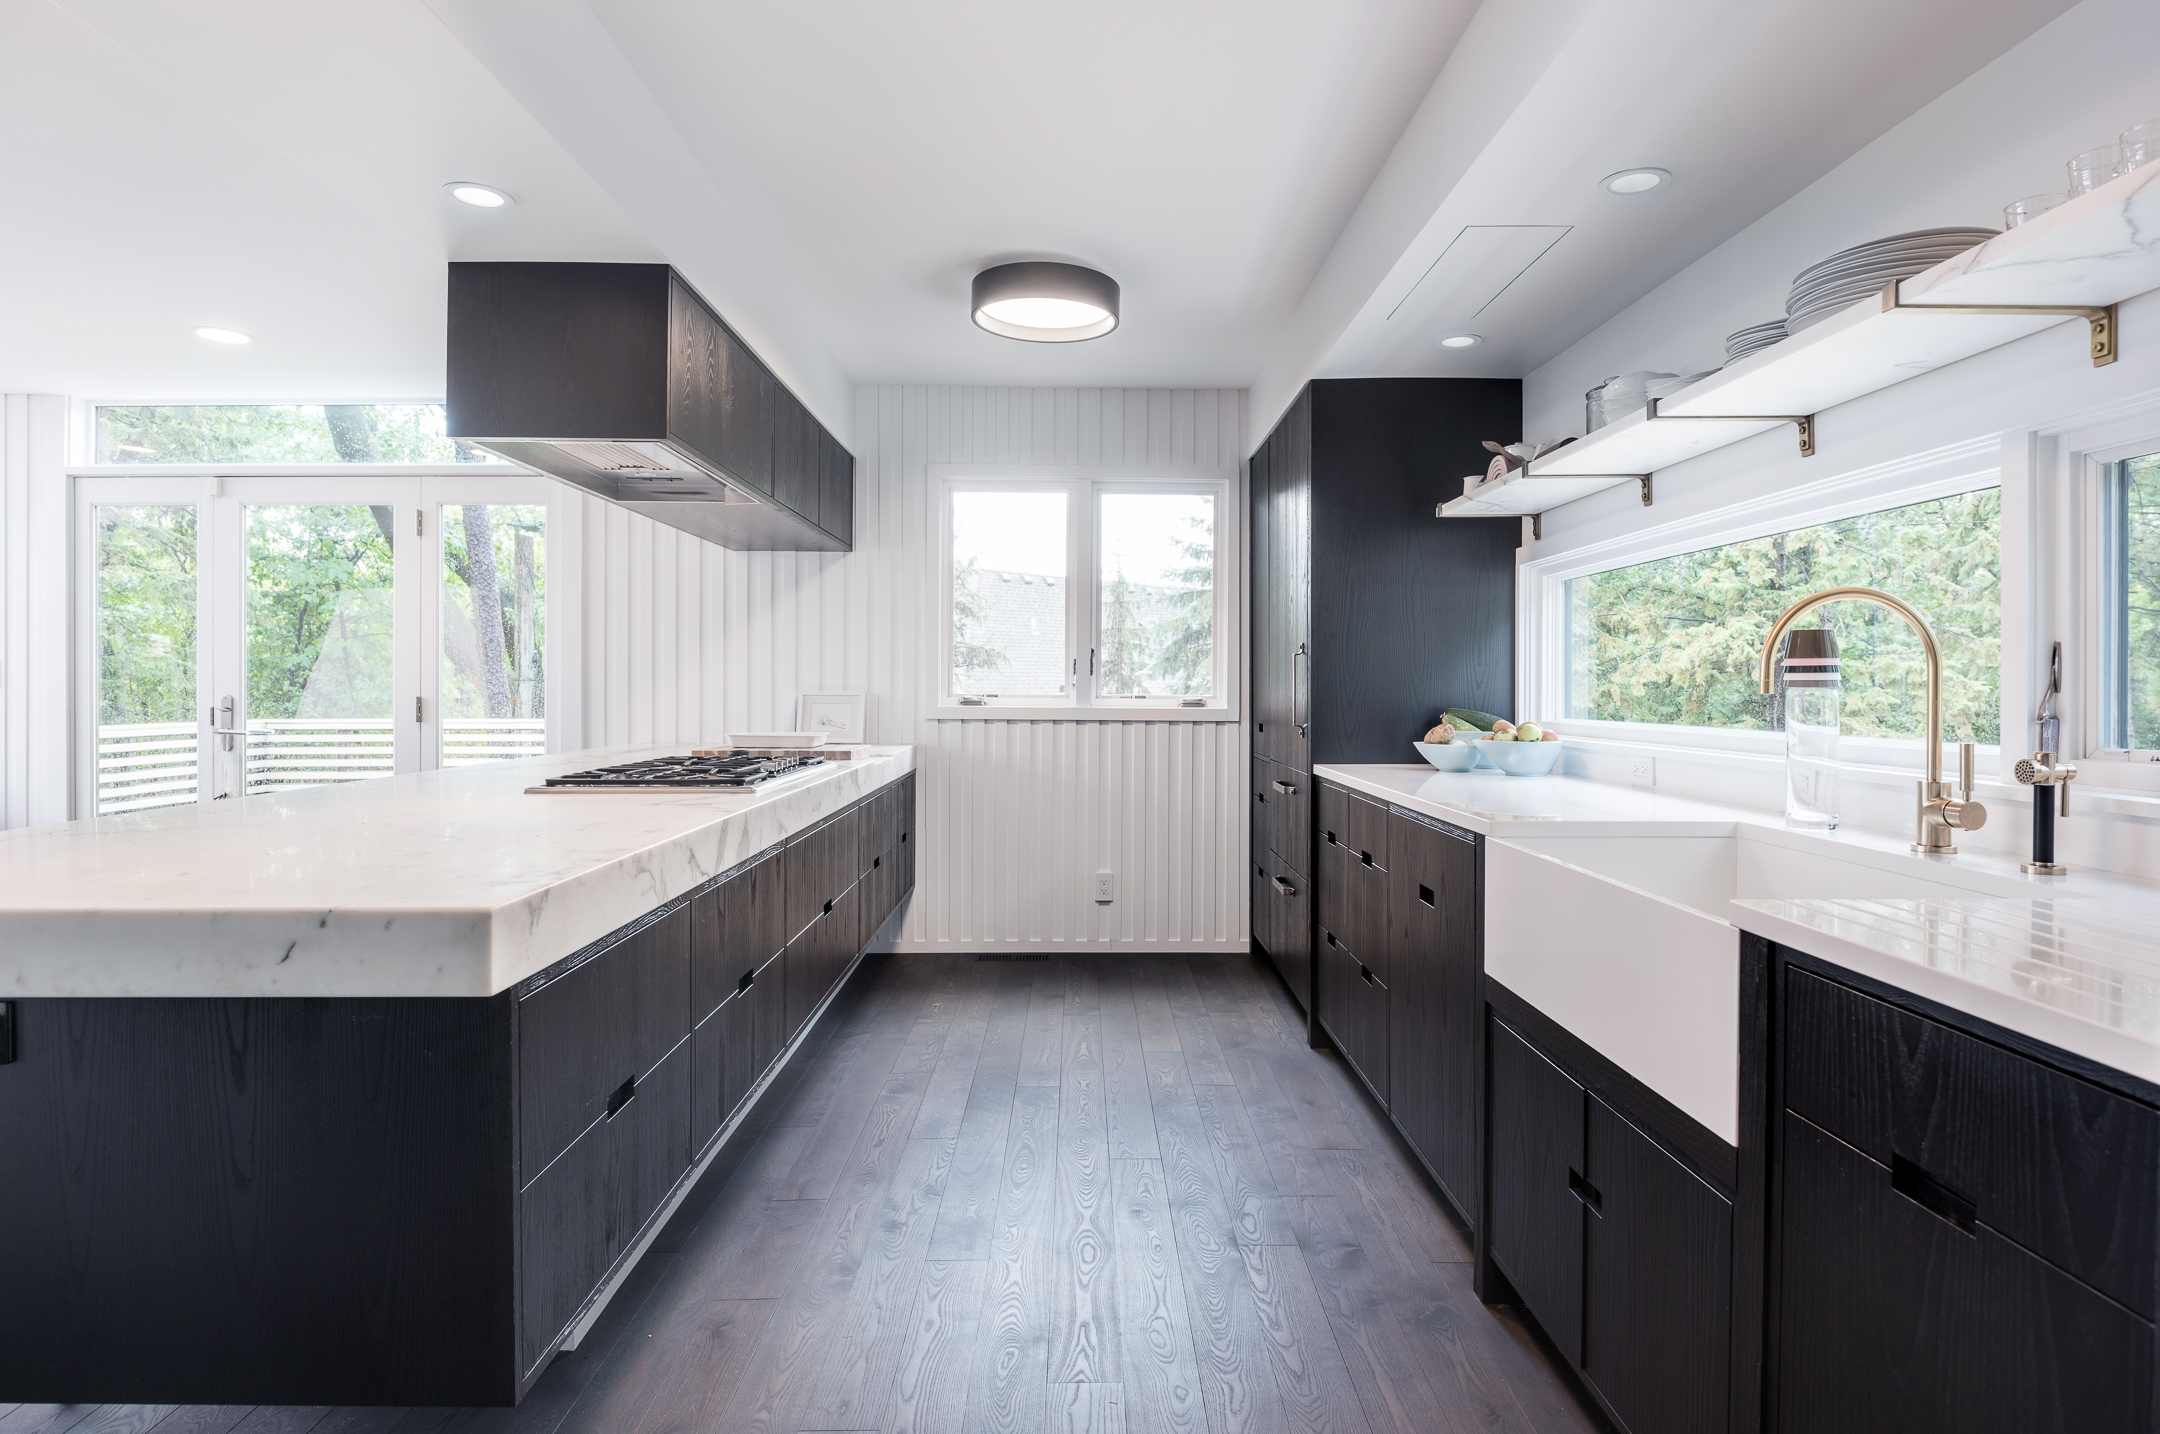 Modern kitchen renovation with dark cabinetry and thick marble countertop